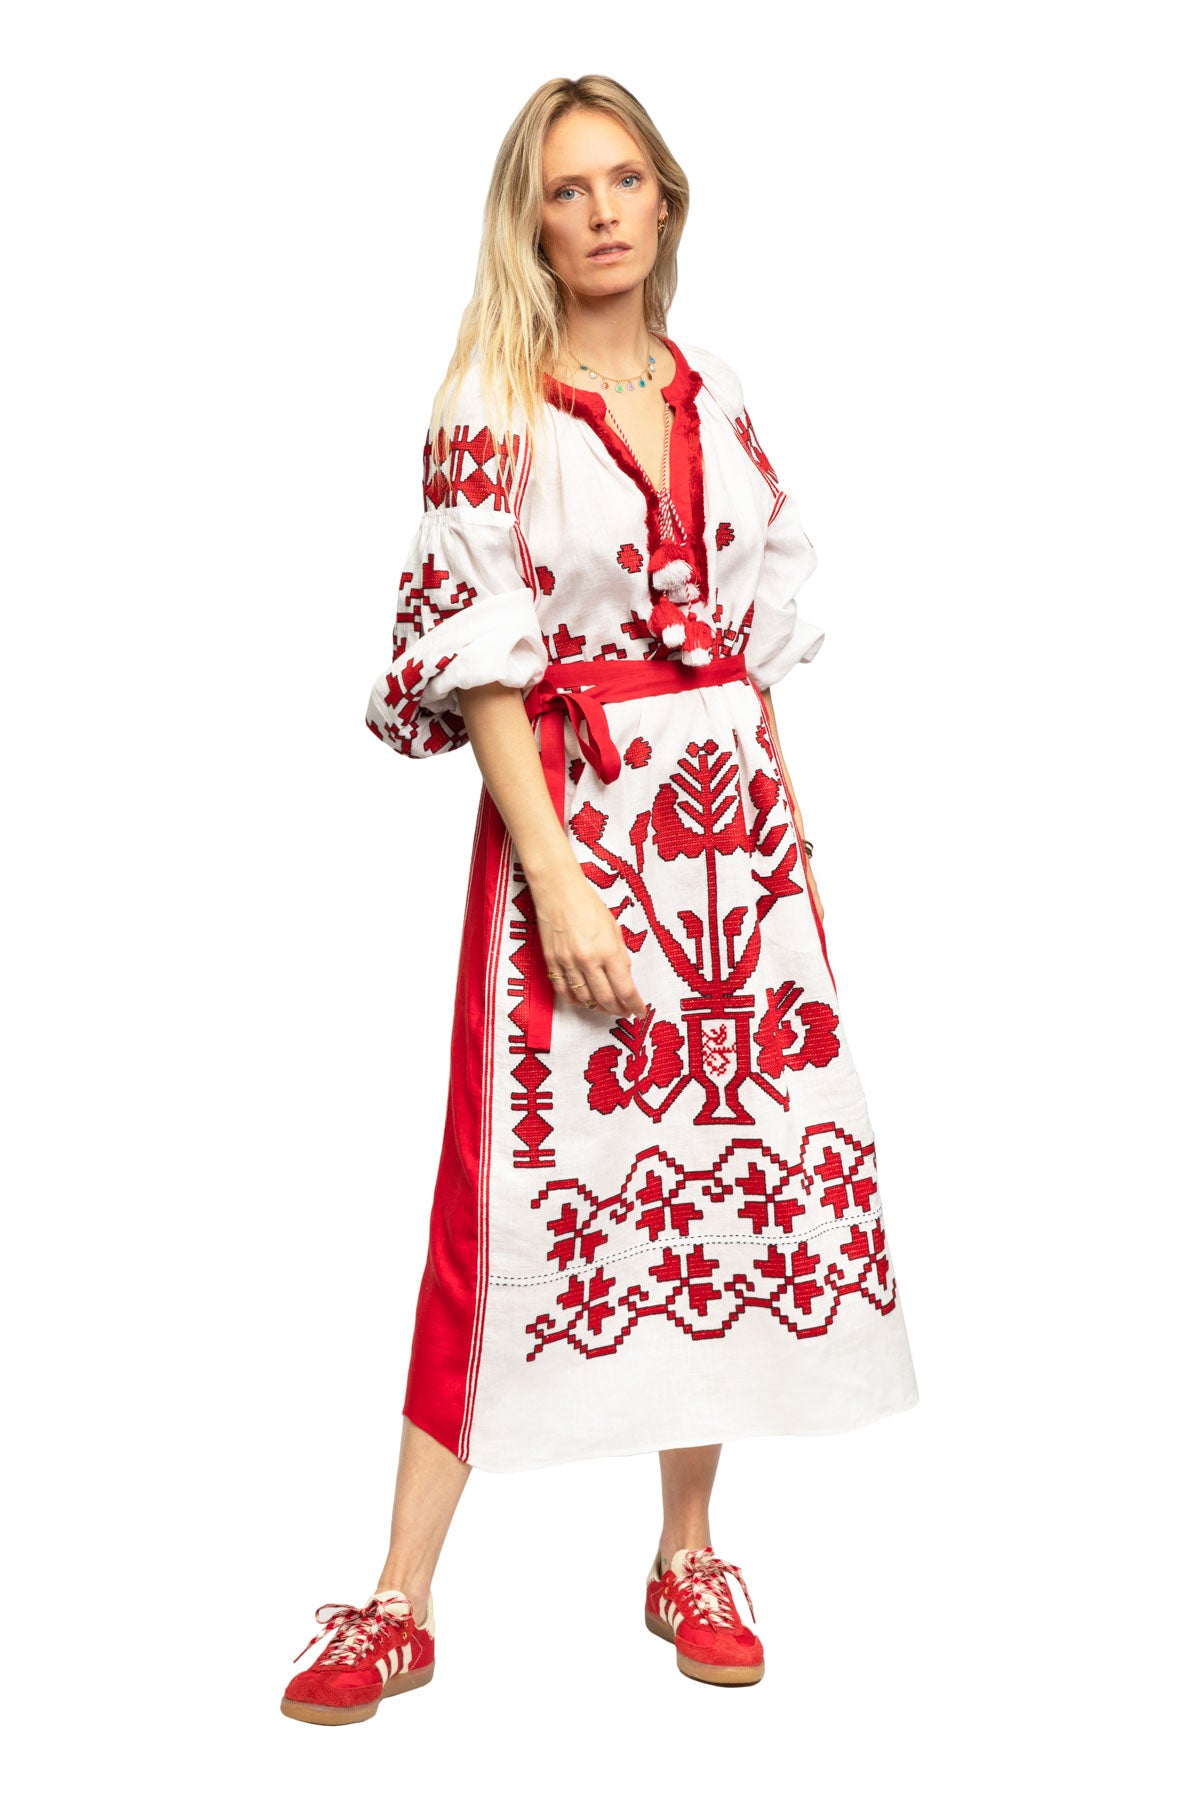 Tree Of Life Dress - Red & White